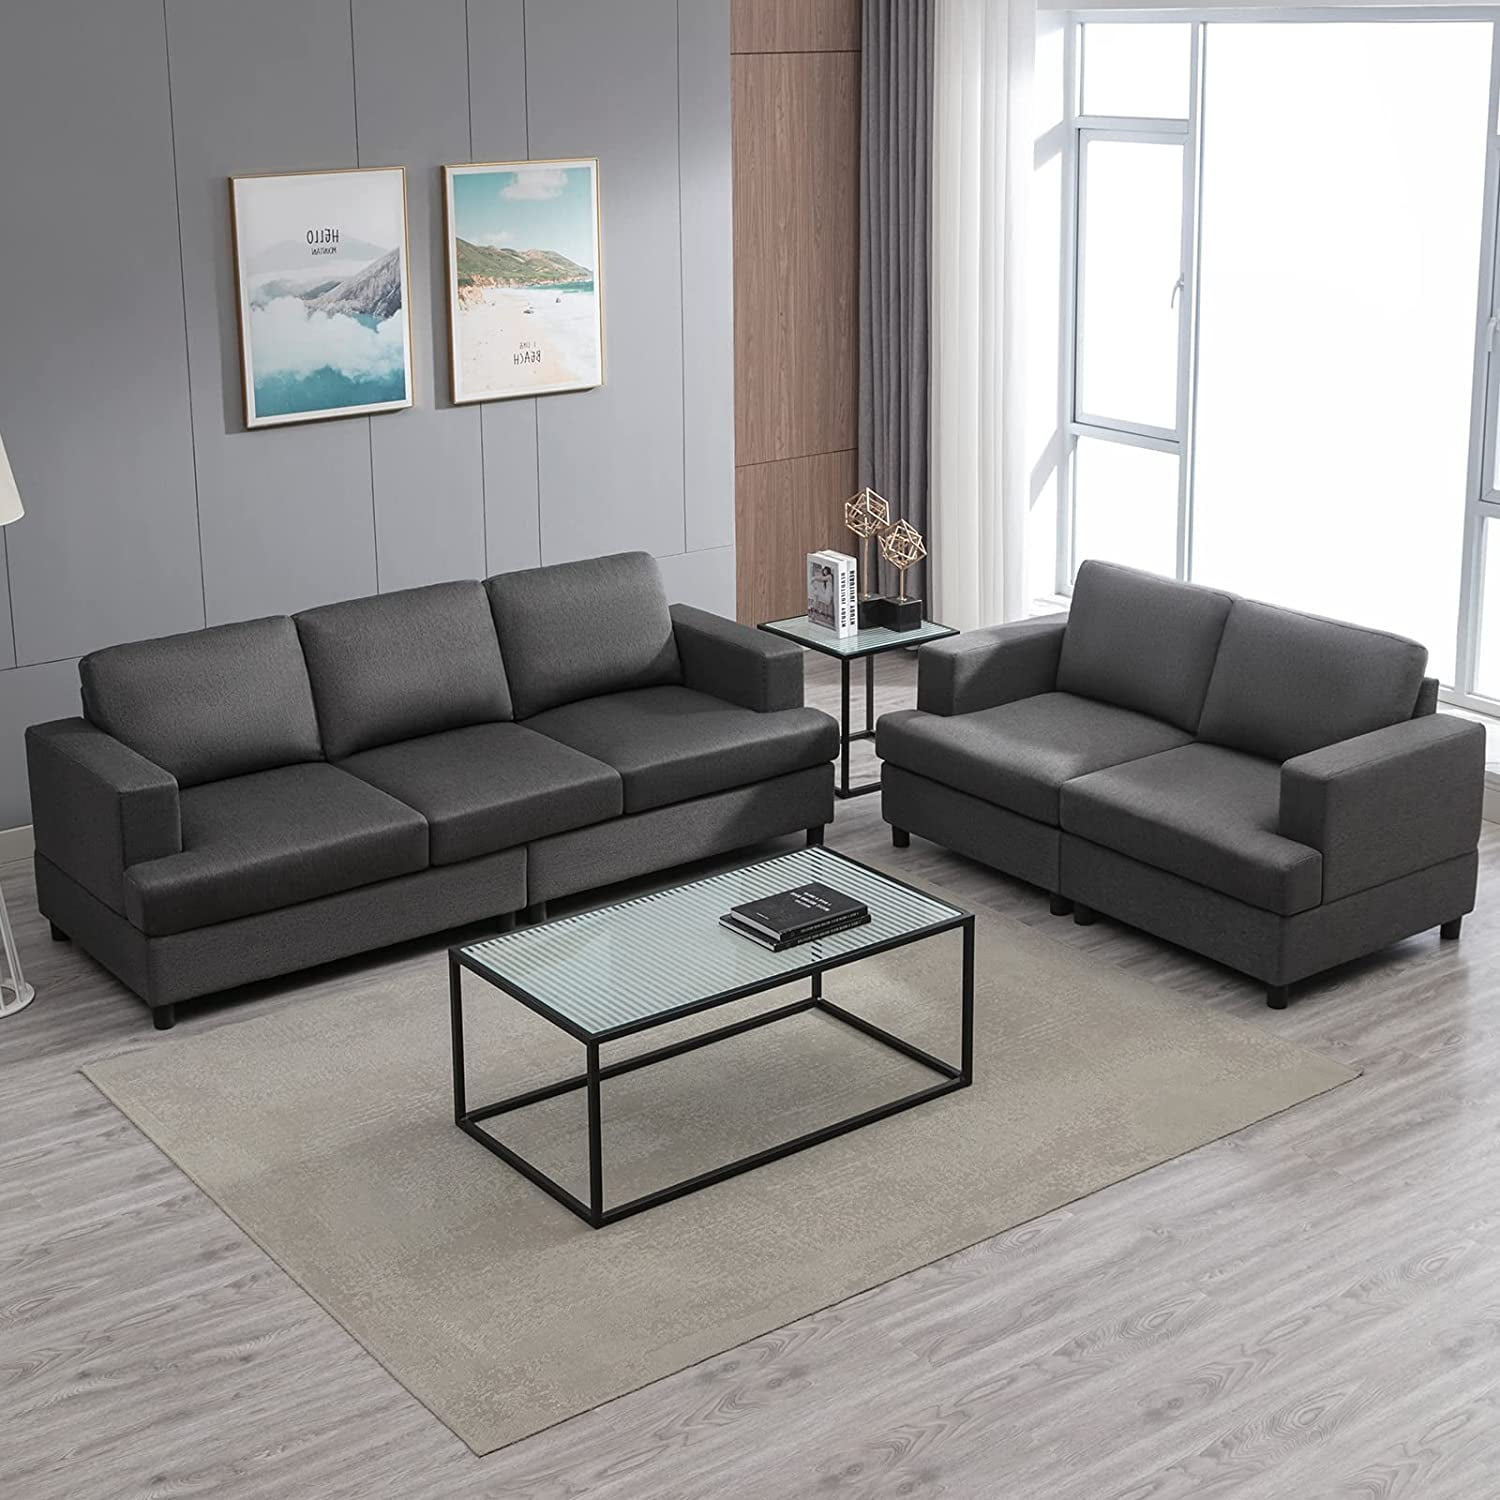 West Onnodig Ampère Mjkone 3 Pieces Sectional Sofa Couch Set Living Room Cloud Sofa Furniture  Set Sofa+Loveseat+Chair for Living Room/Office/Apartment/Bedroom  Comfortable Sofa with Comfy Cushion&amp;Wood Fra - Walmart.com